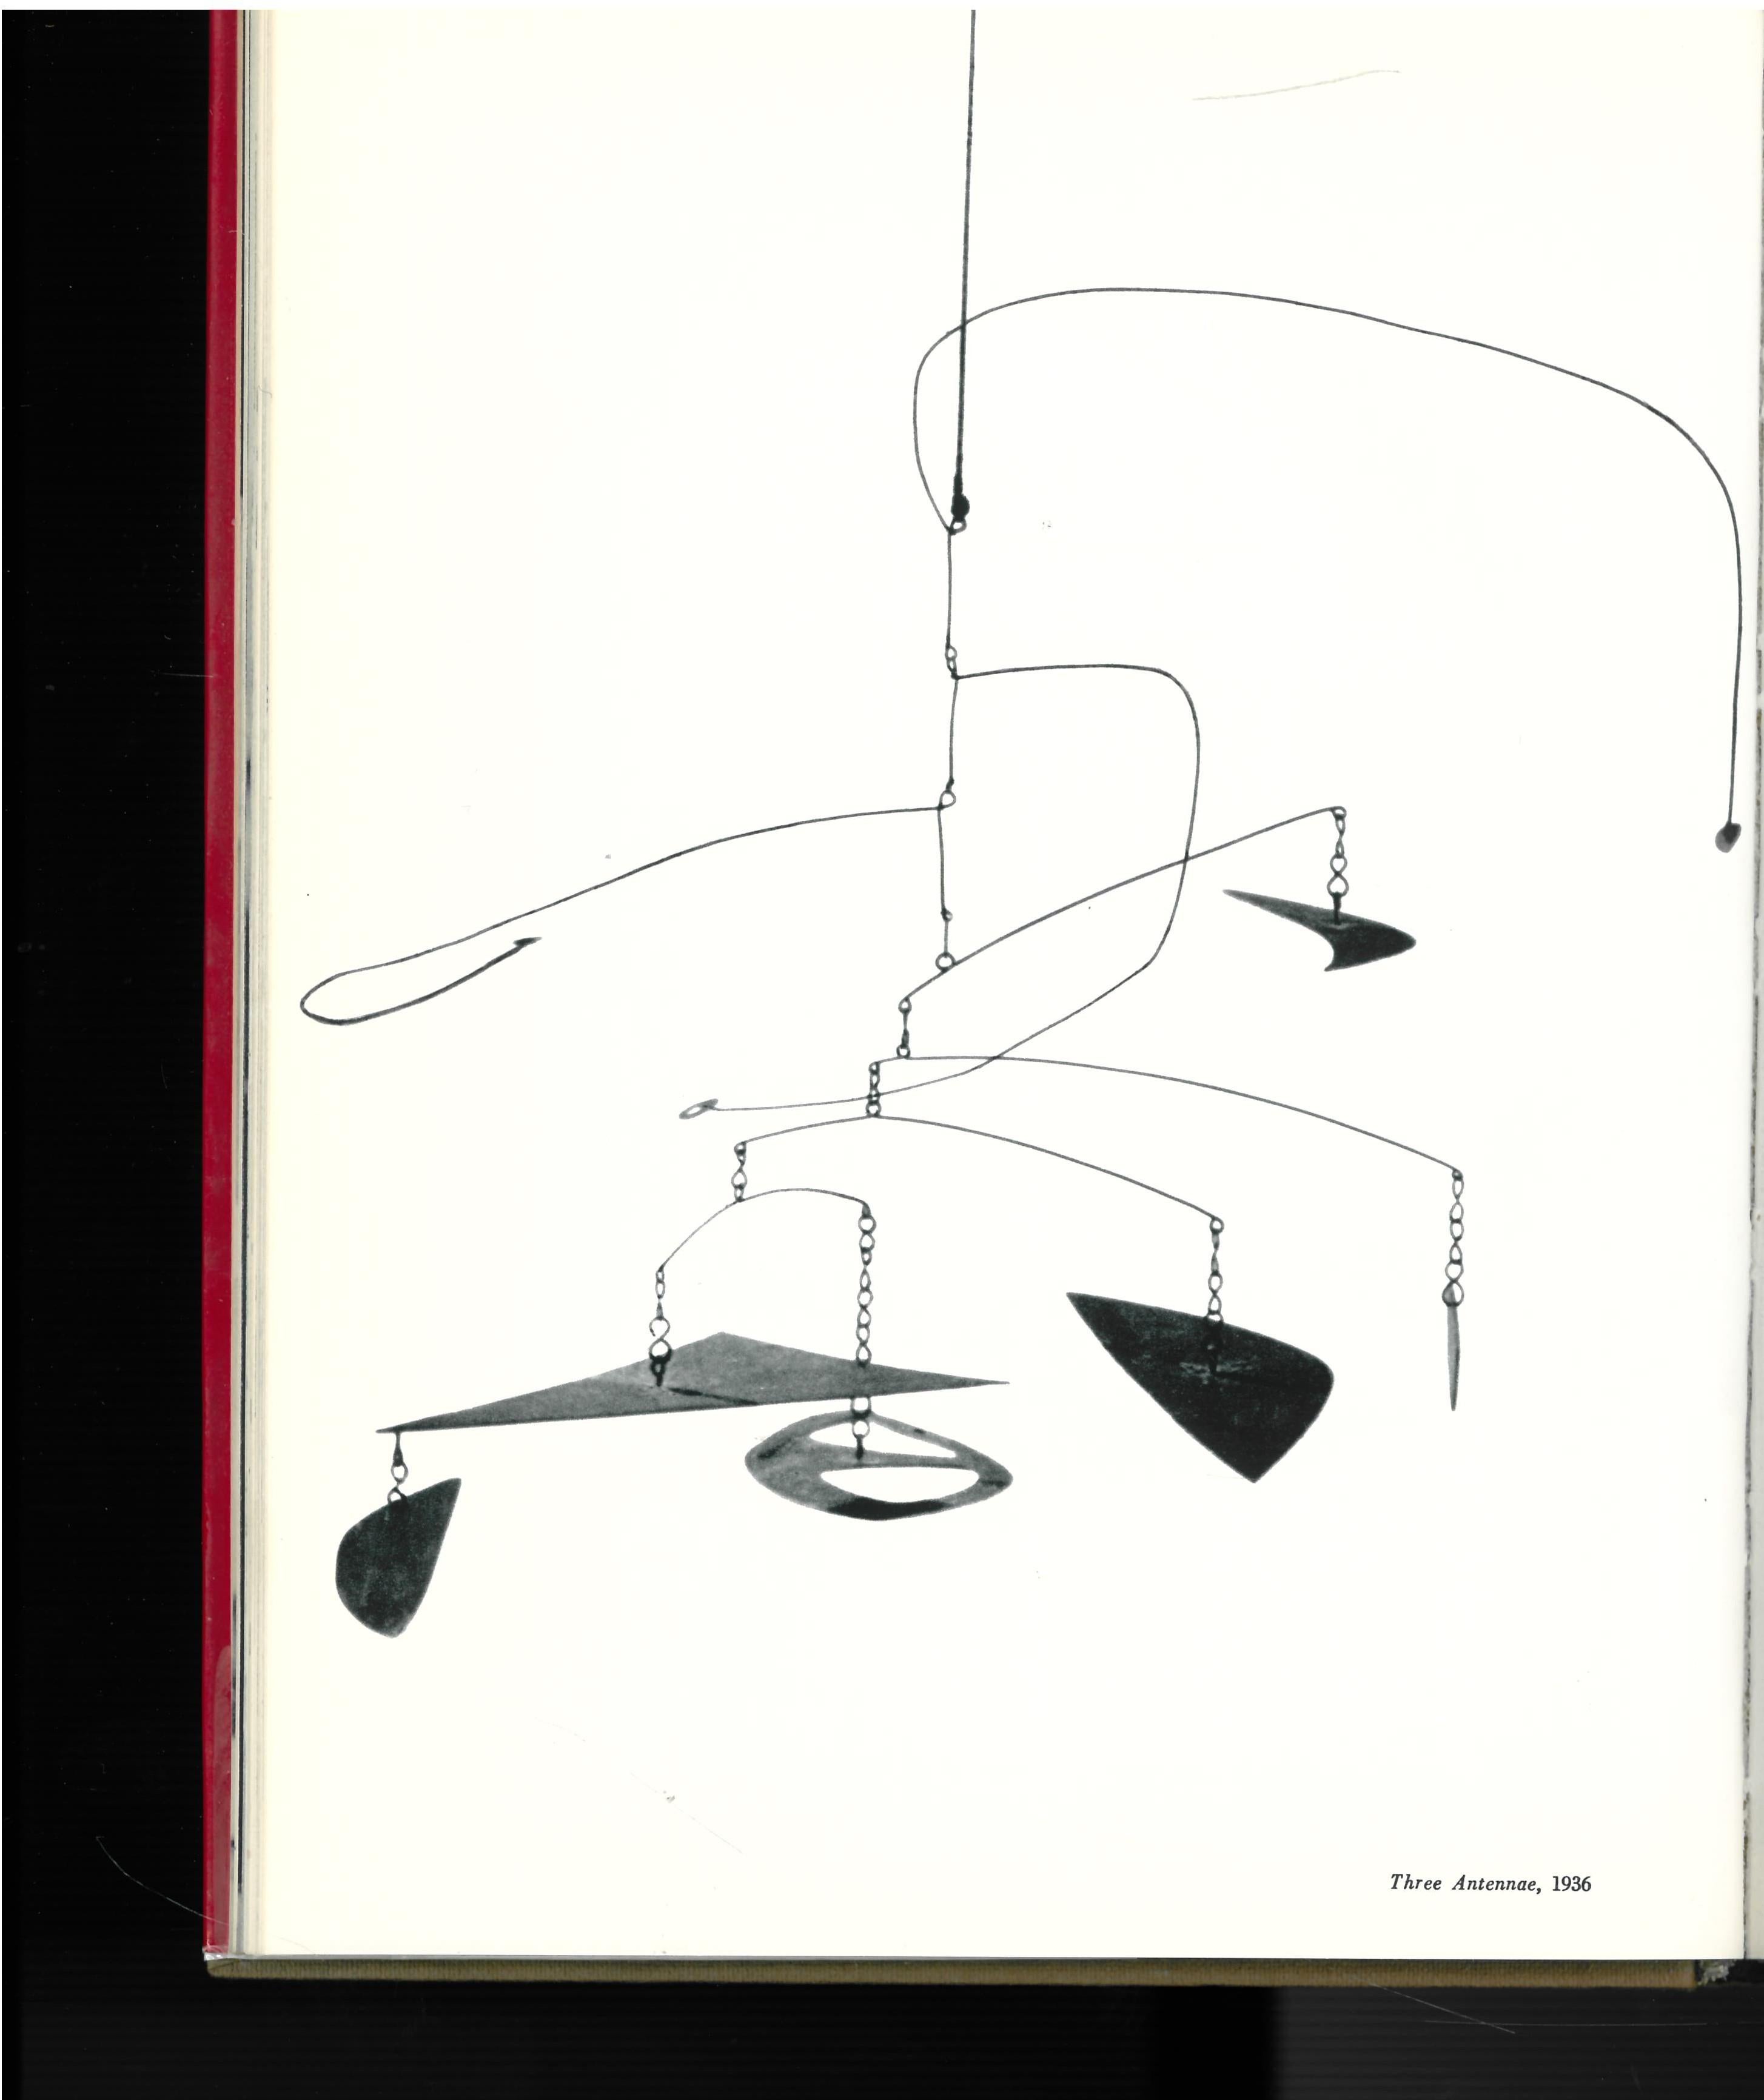 This book is a critical biography of the artist and sculptor Alexander Calder. The development of his Mobiles and Stabiles is recorded from their origins in the 1920s through to the mid-1960s when the book was written. The photographs by Pedro